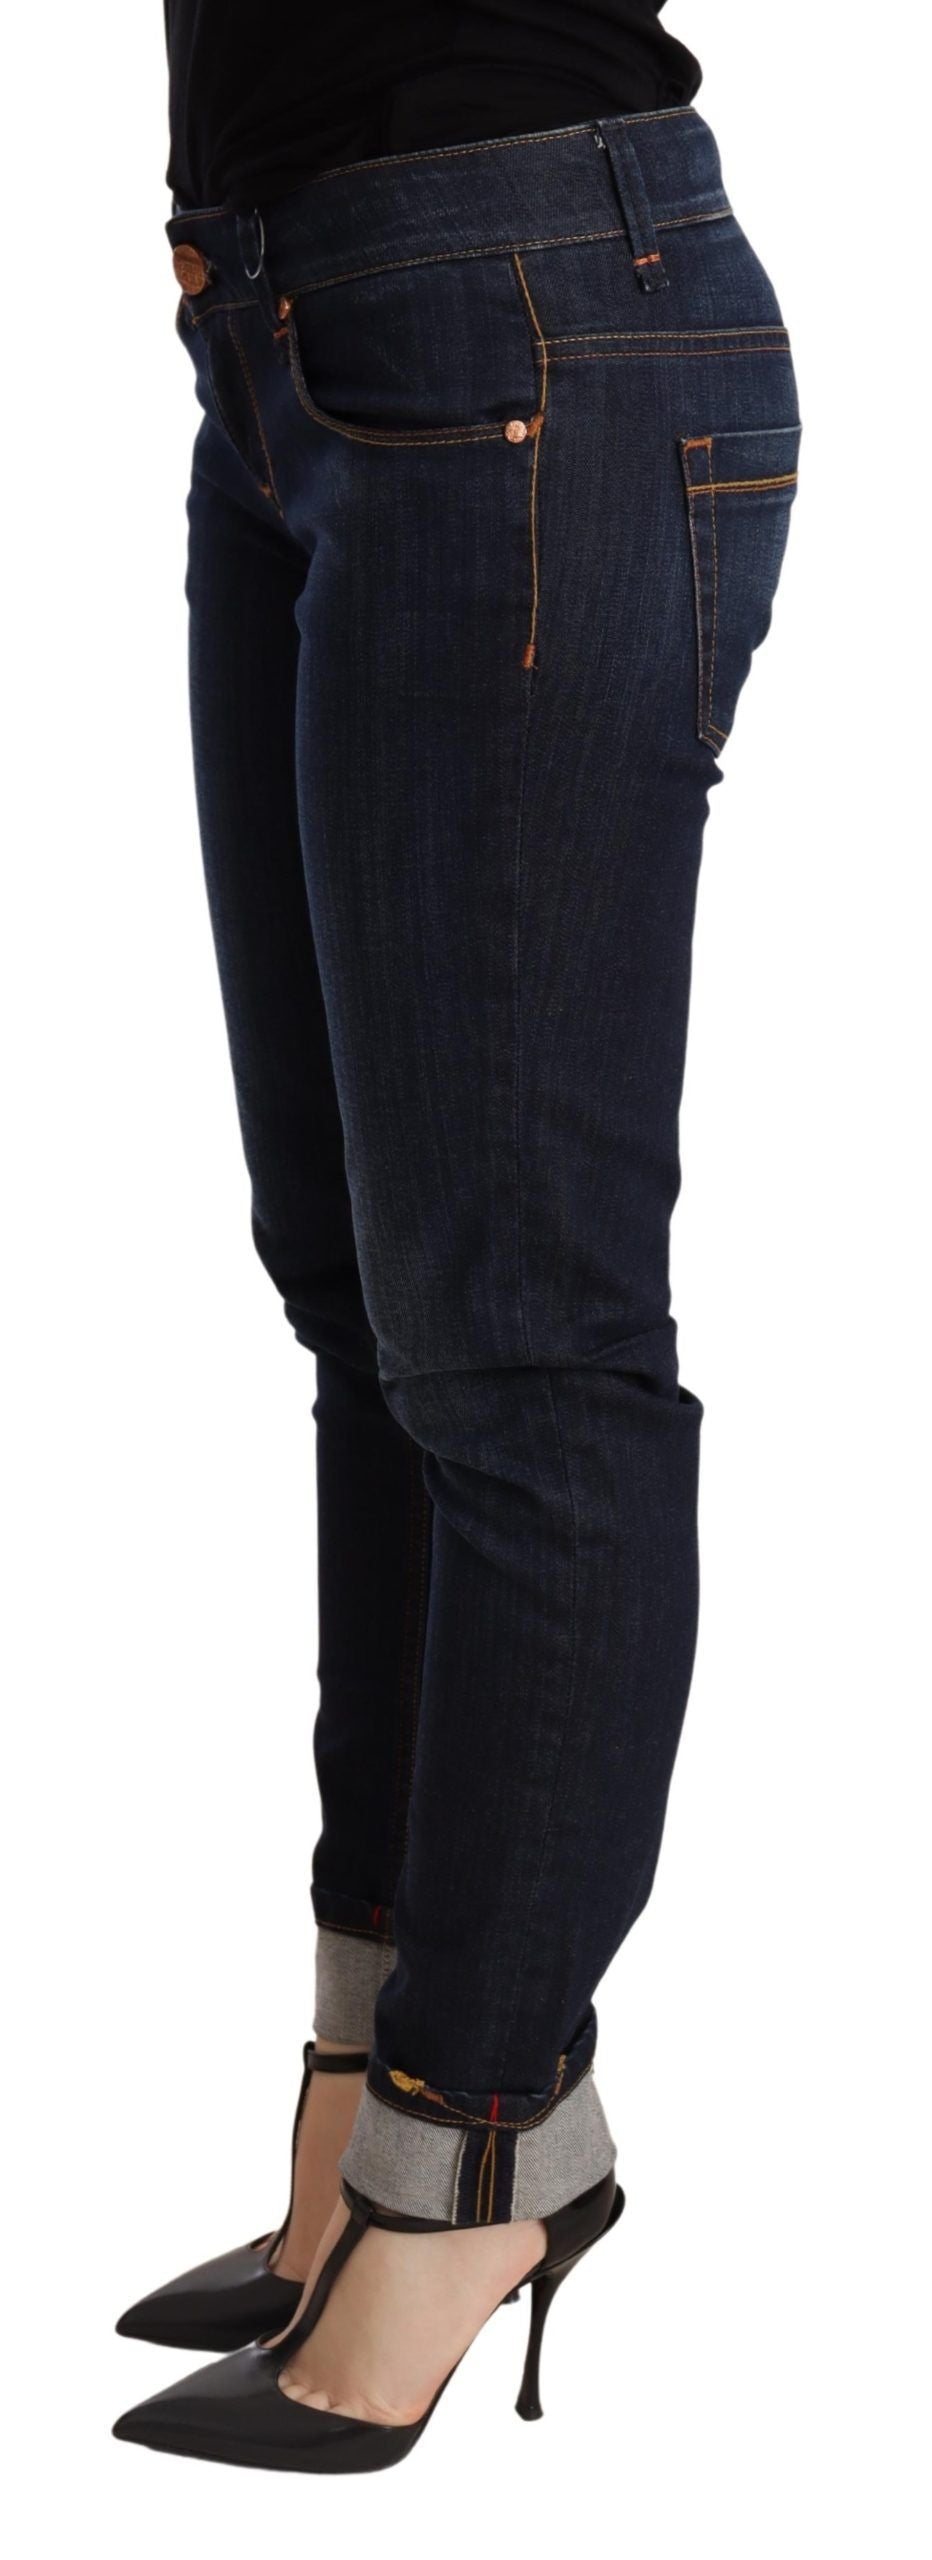 Blue Washed Low Waist Skinny Denim Trouser - Designed by Acht Available to Buy at a Discounted Price on Moon Behind The Hill Online Designer Discount Store